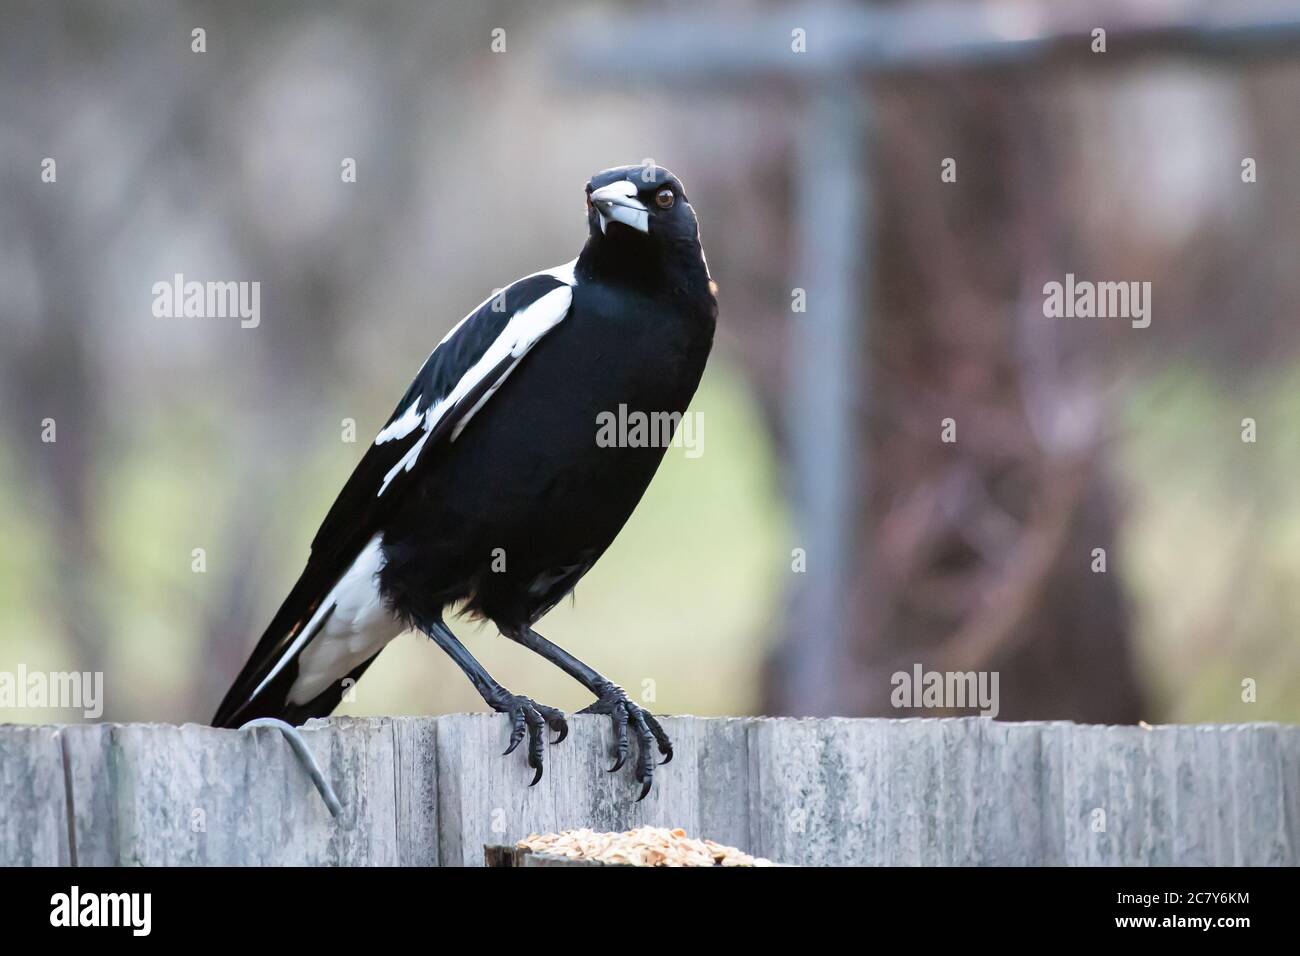 An Australian Magpie Sitting on a fence Stock Photo